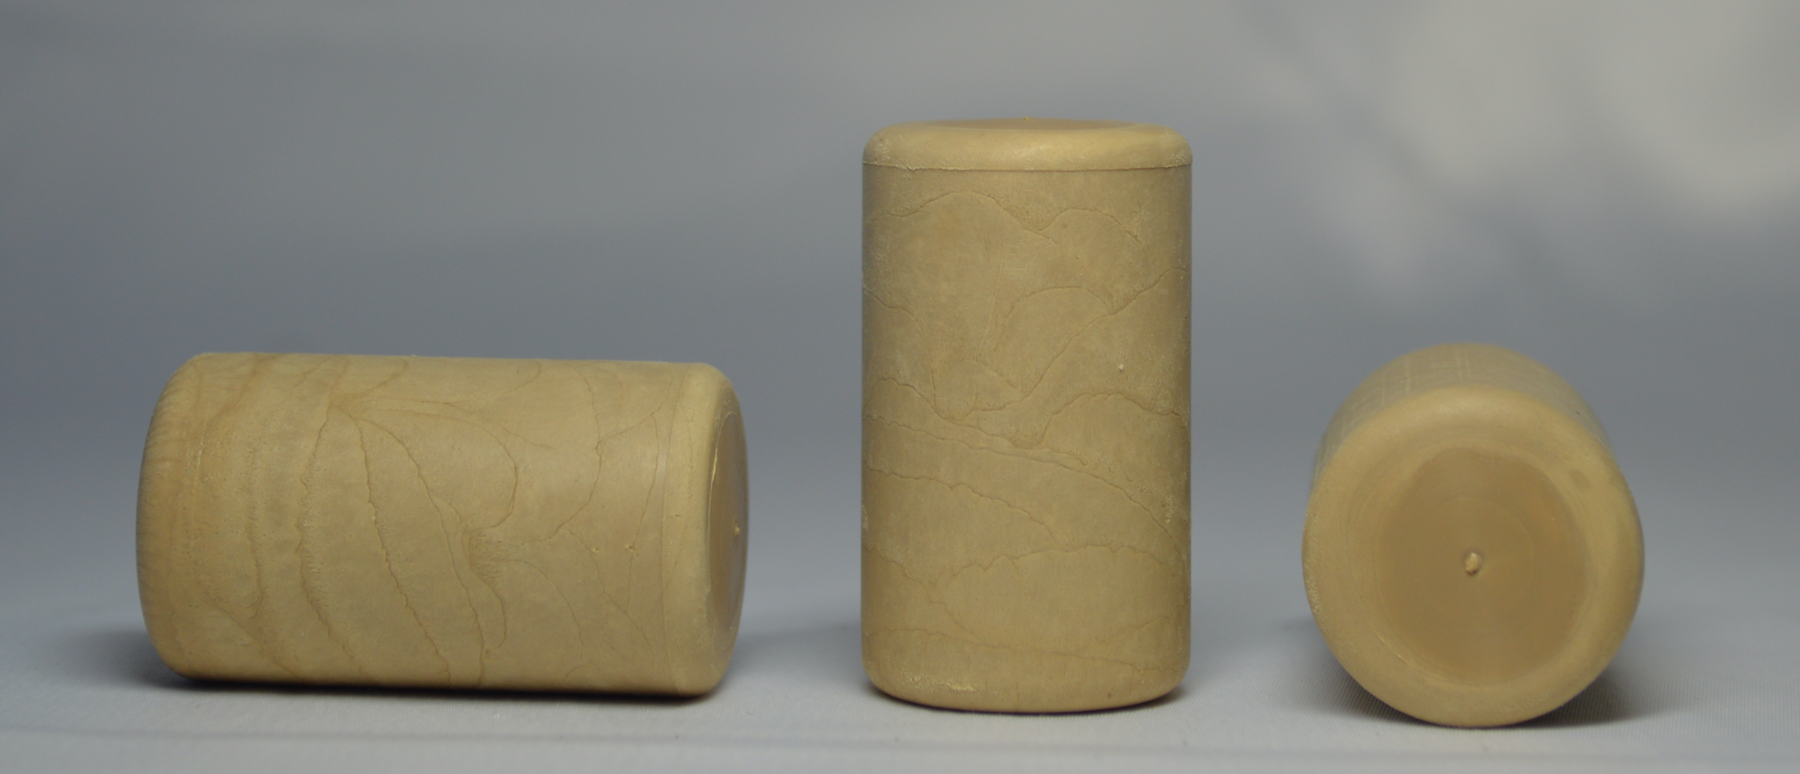 Synthetic Wine Corks